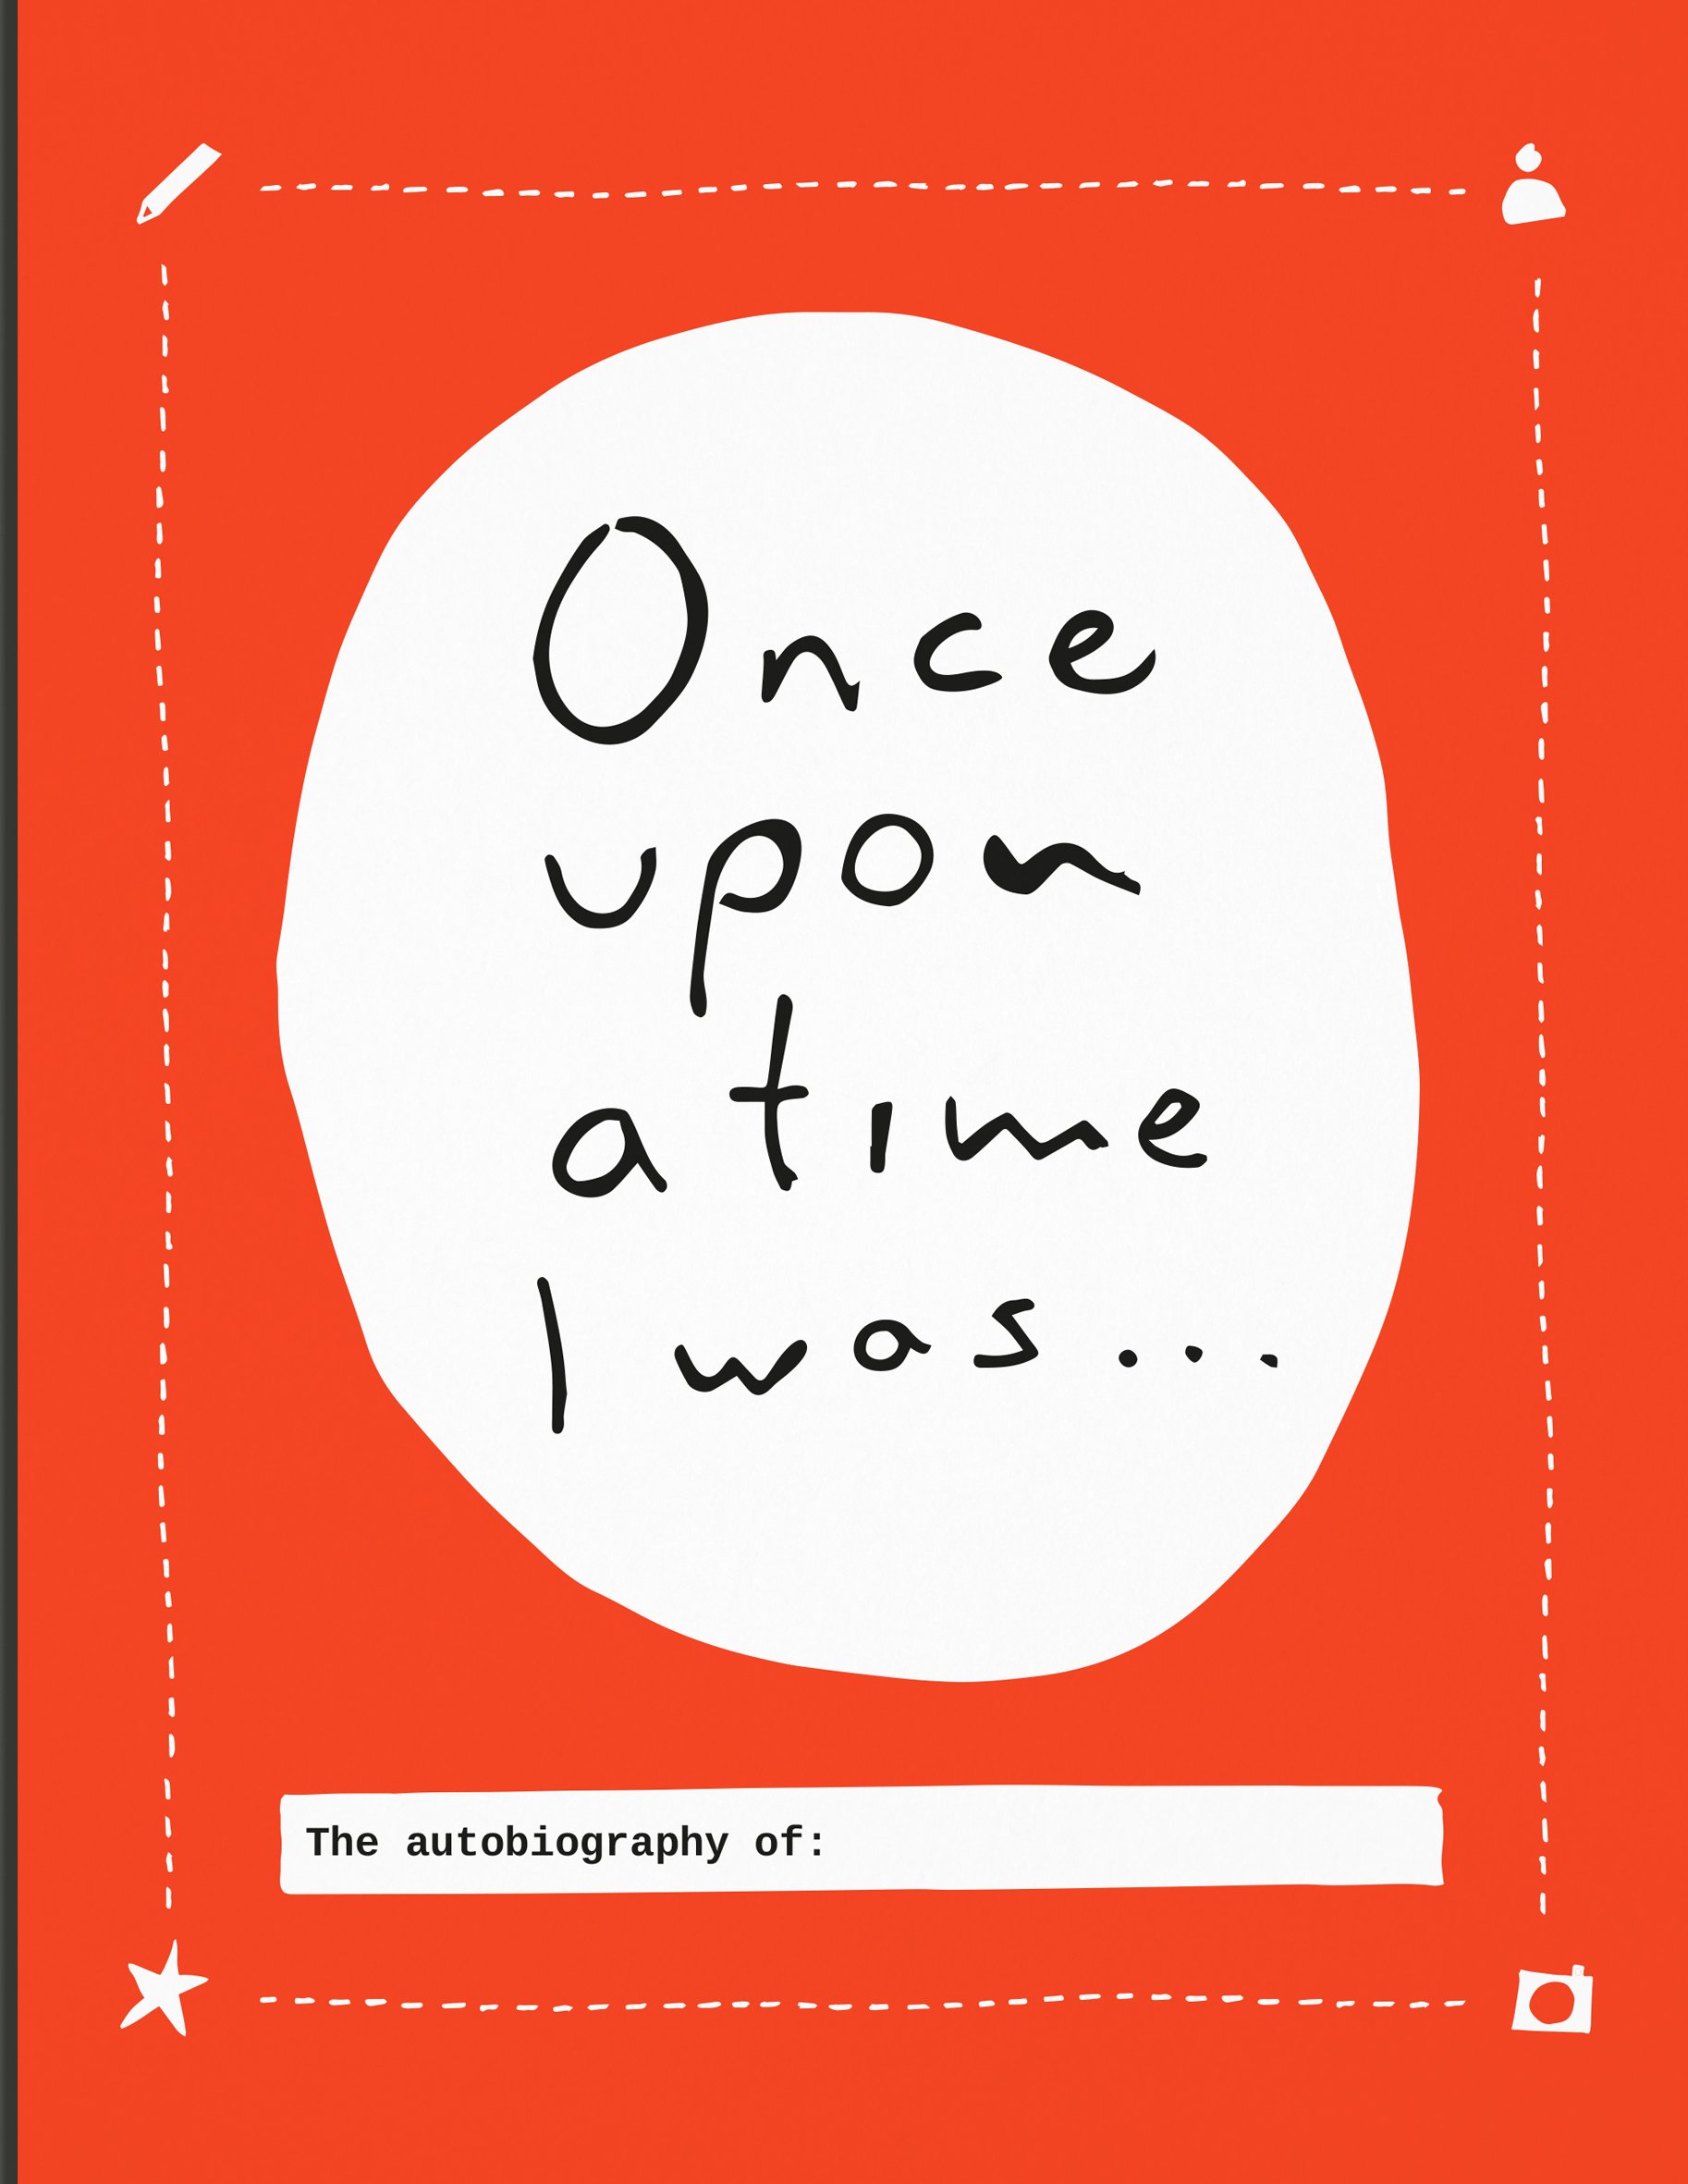 Once upon a time I was... | Bis Publishers